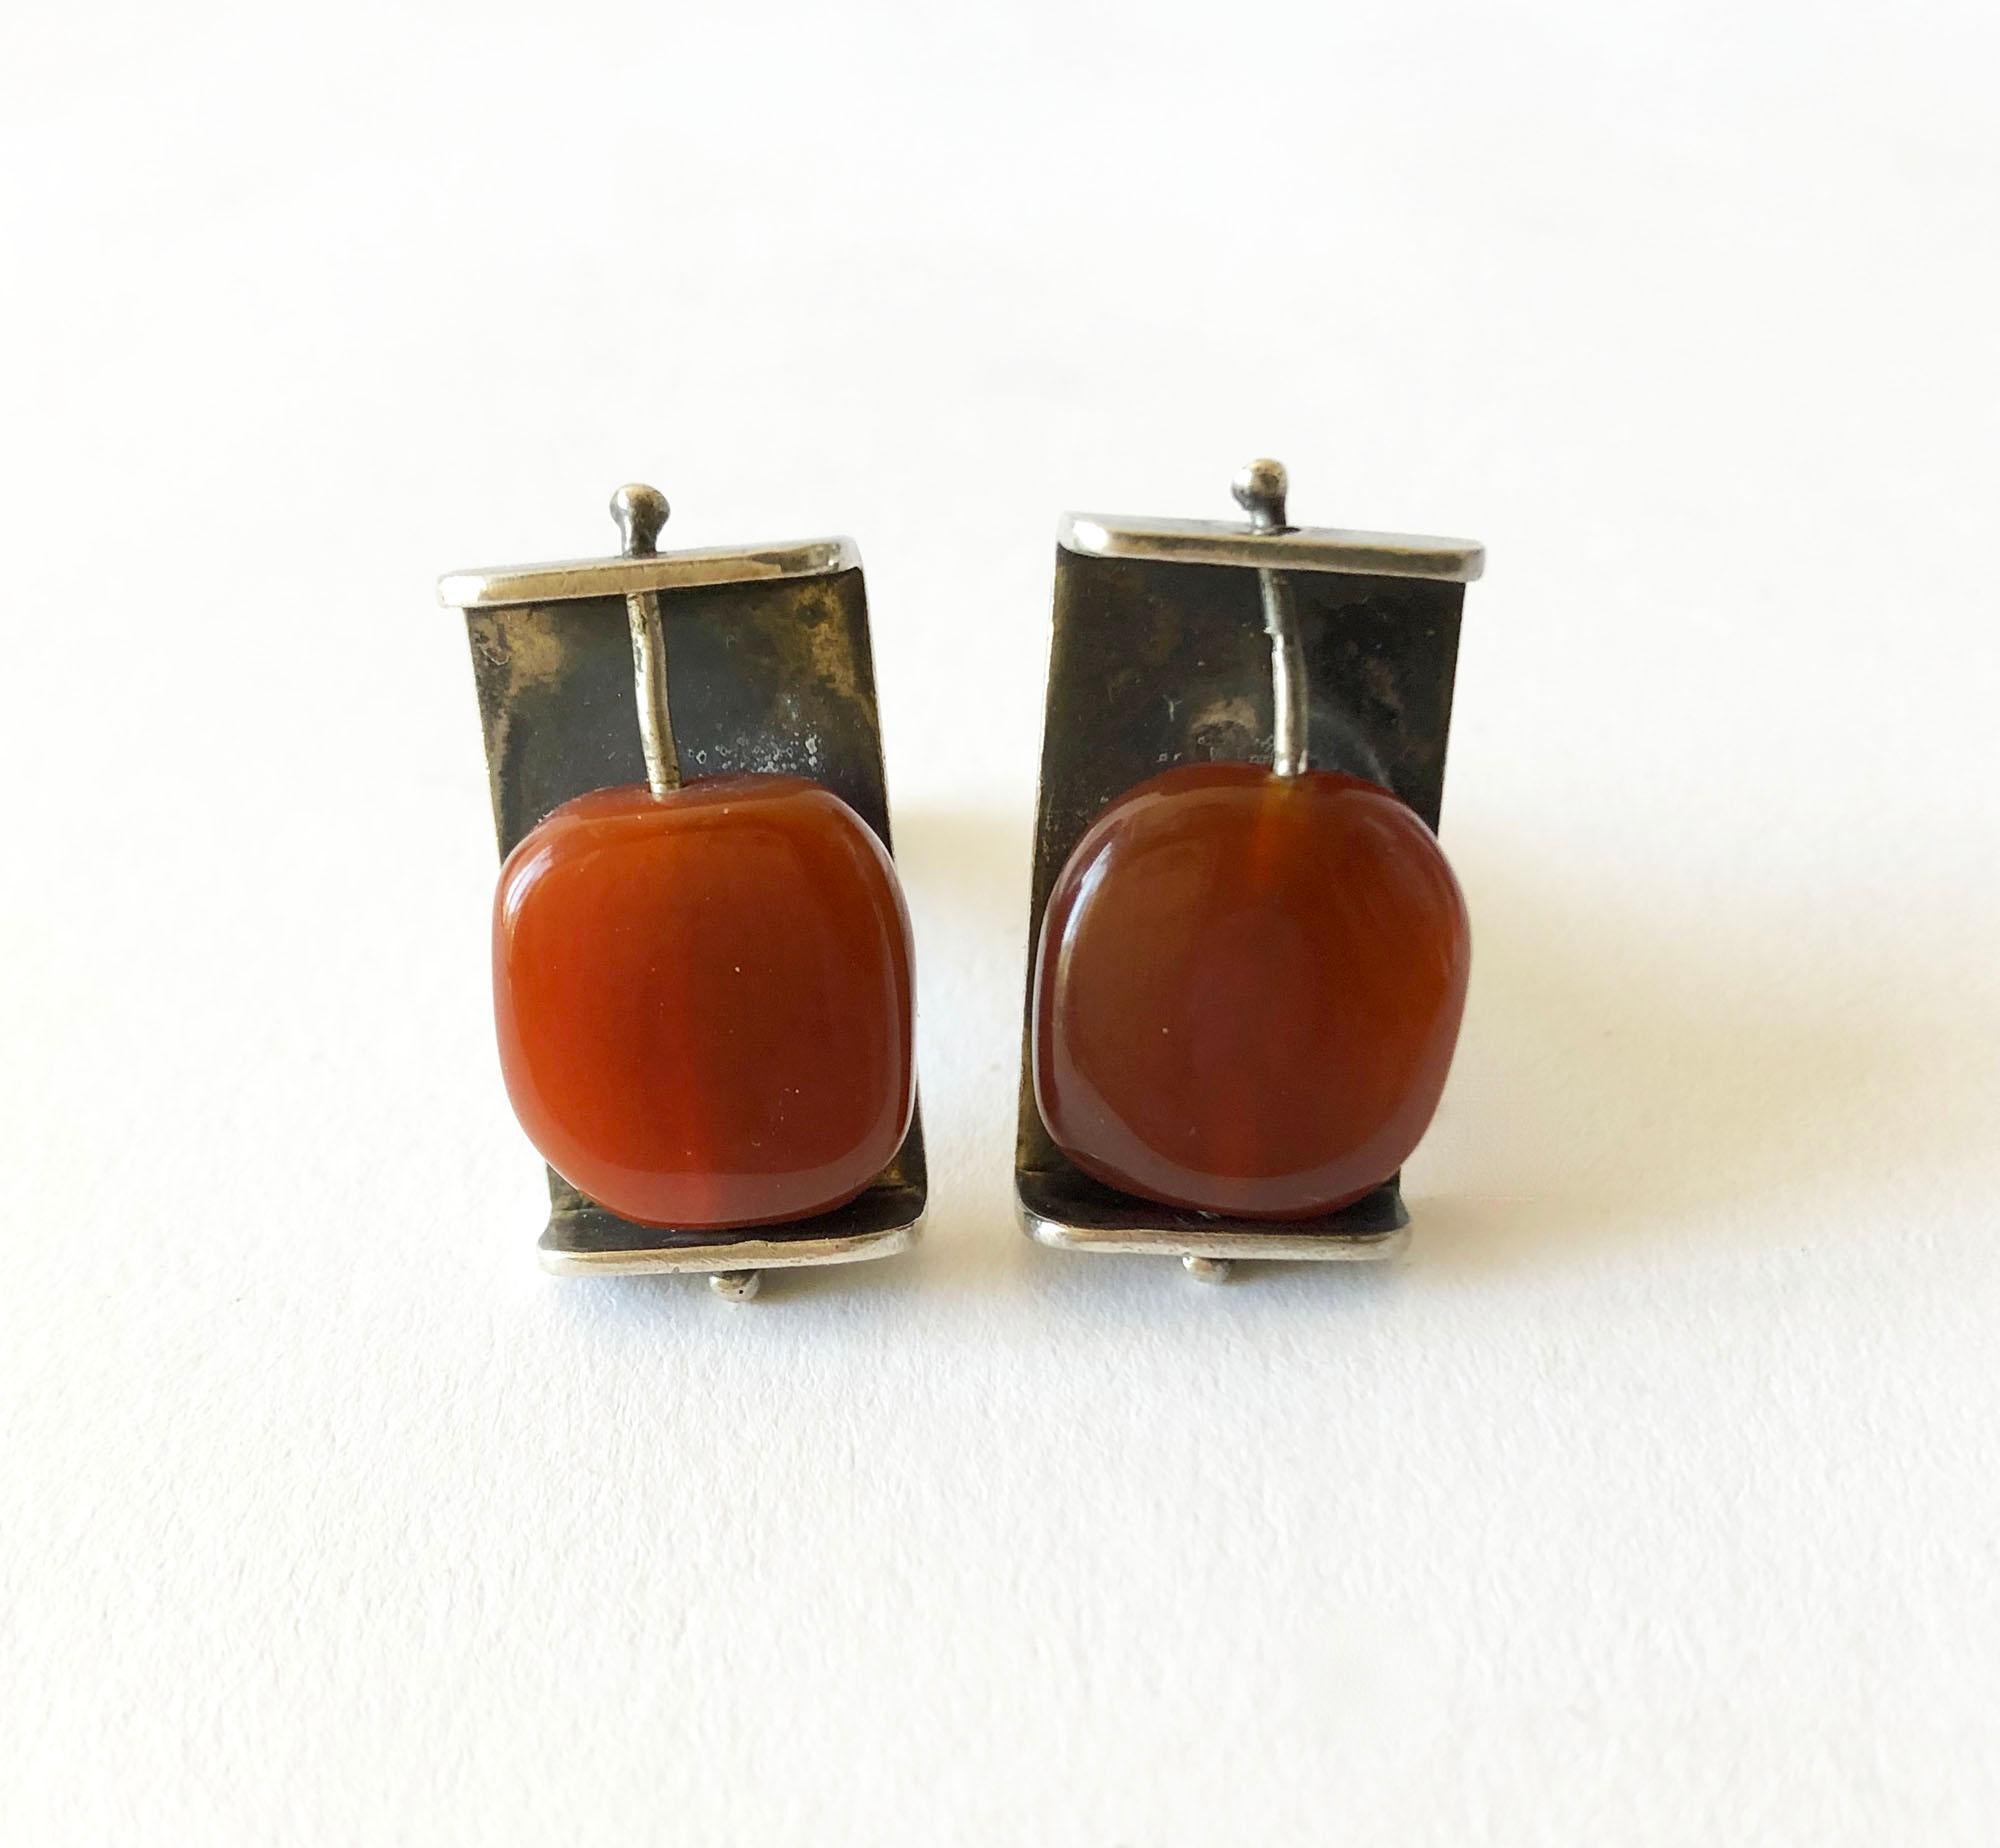 Rare, sterling silver cufflinks featuring natural carnelian flat beads on wire created by Henry Steig of New York City, circa 1950's. Cufflinks measure 7/8